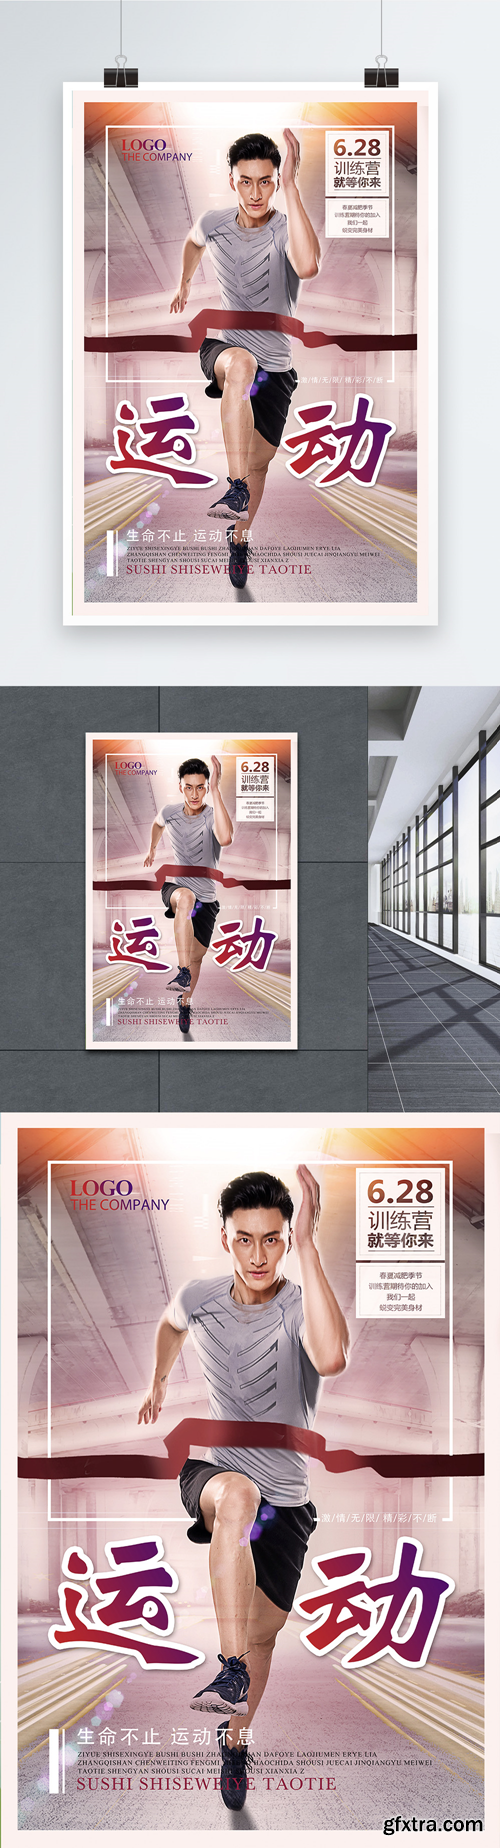 sports fitness poster